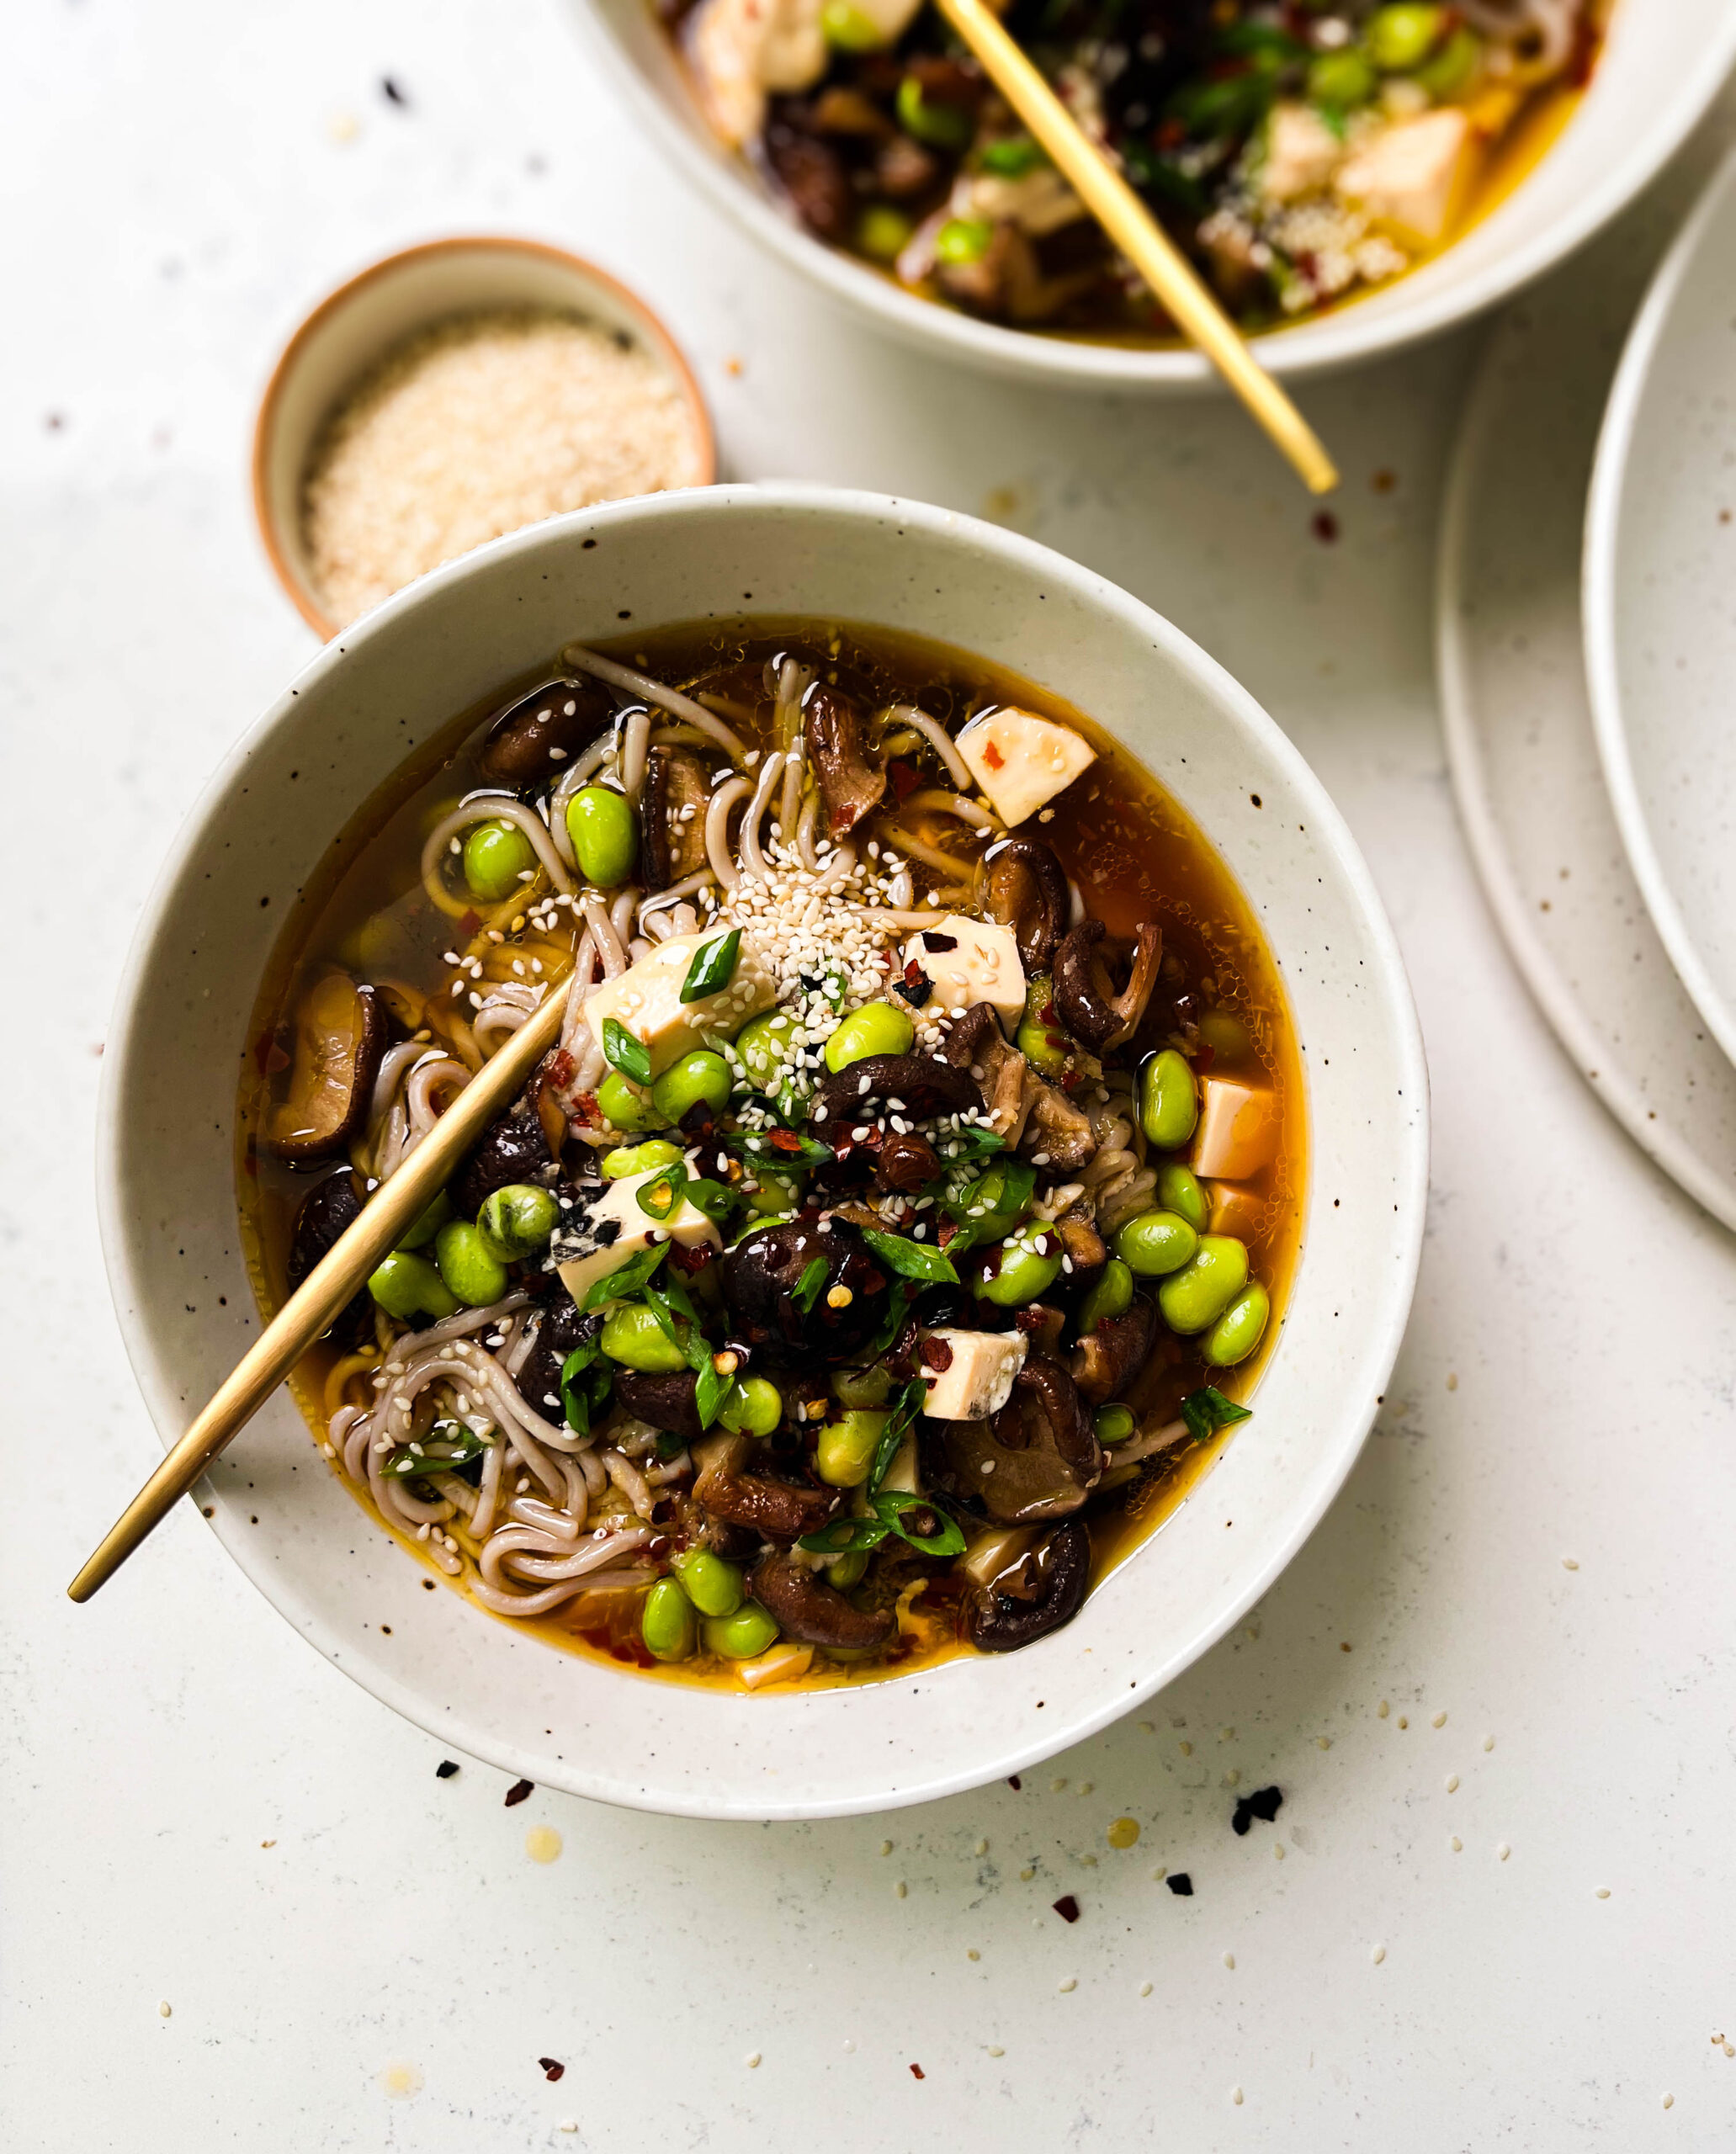 two bowls of spicy mushroom noodle soup next to a bowl of sesame seeds